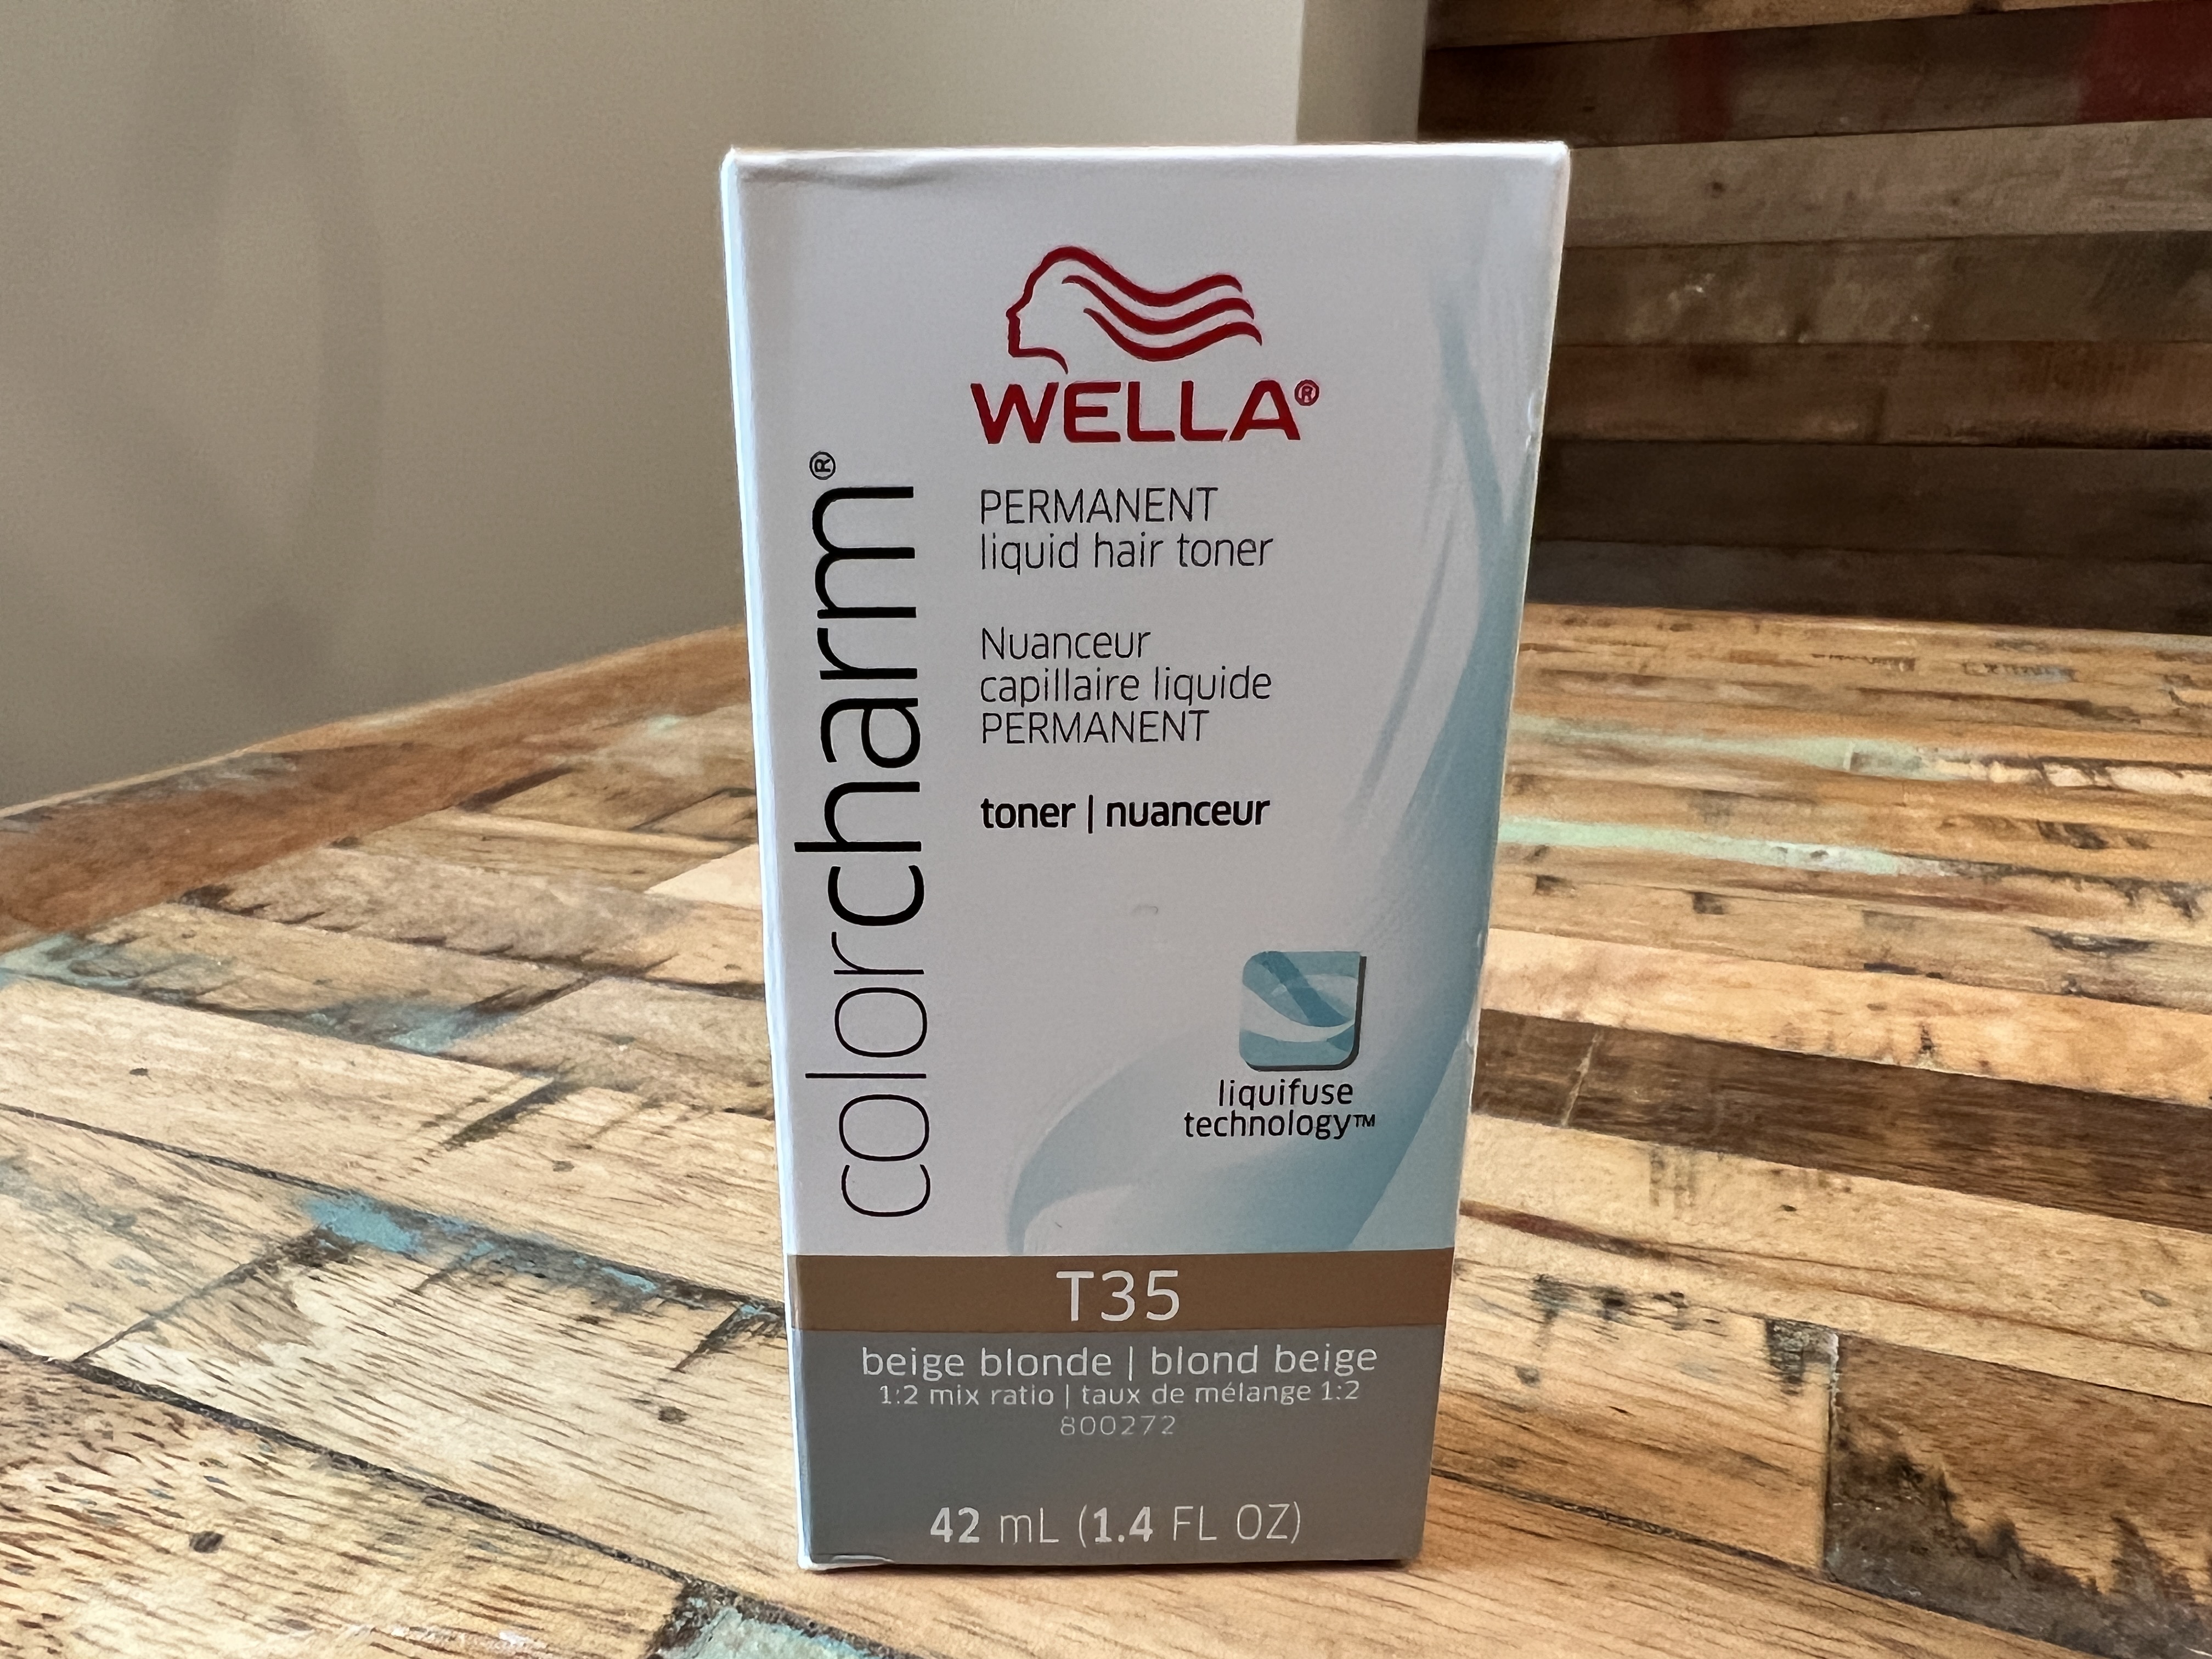 Wella T35 Beige Blonde Color Charm permanent liquid hair toner with liquifuse technology.